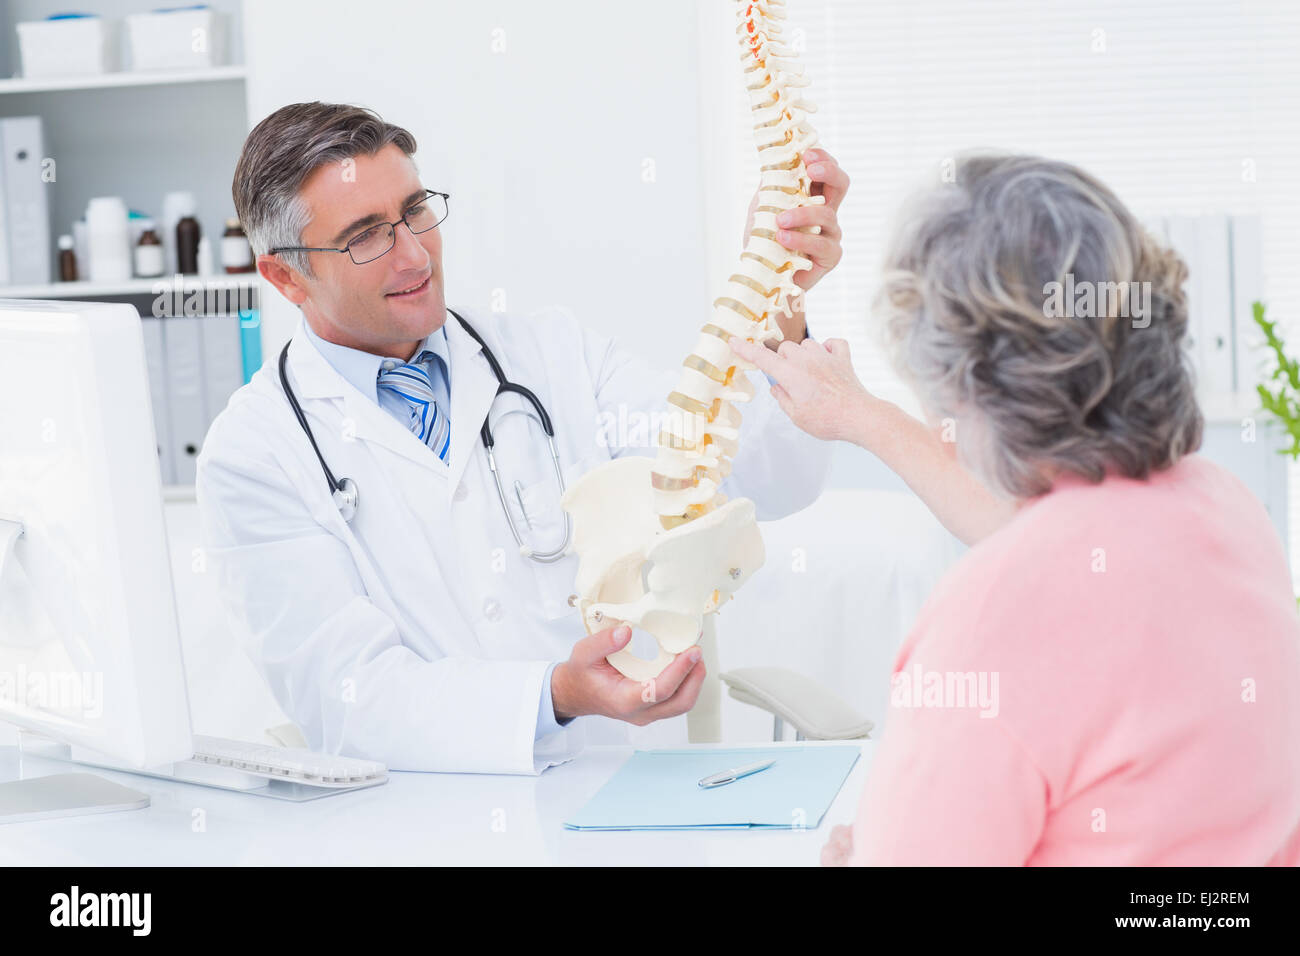 Doctor showing anatomical spine while patient touching it Stock Photo